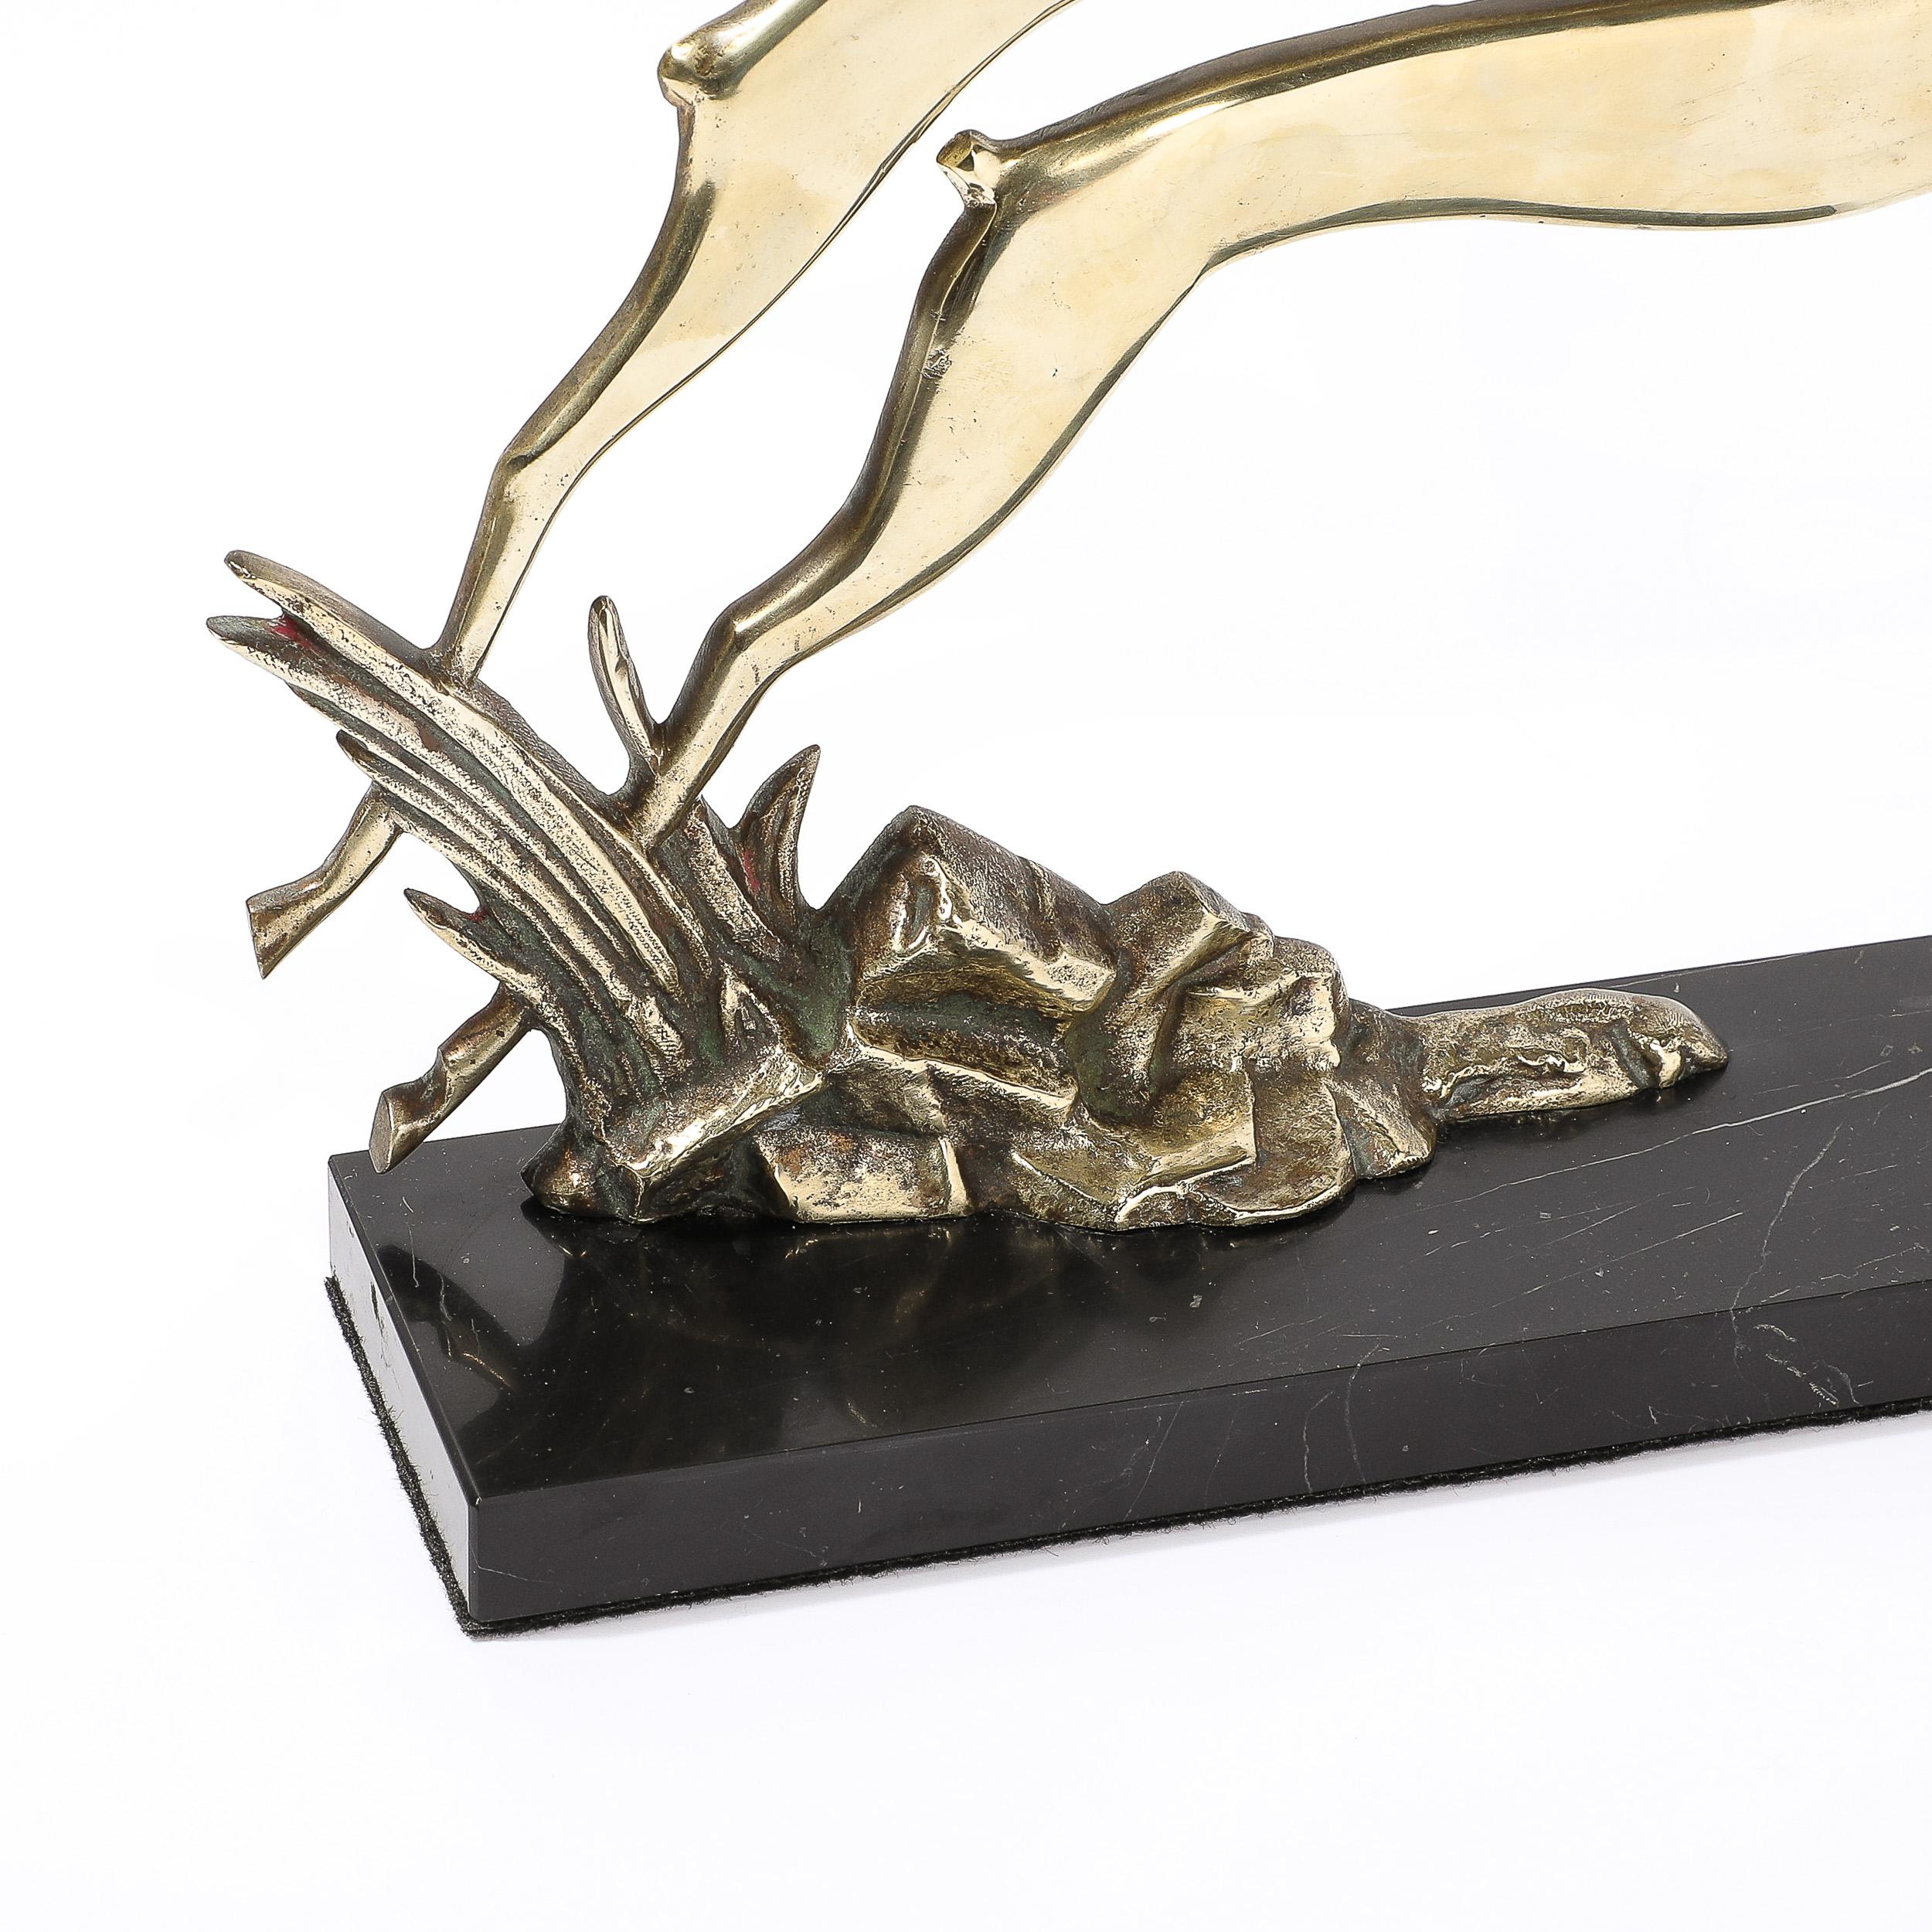 Art Deco Leaping Gazelle Sculpture in Polished Brass on Black Marble Base For Sale 7